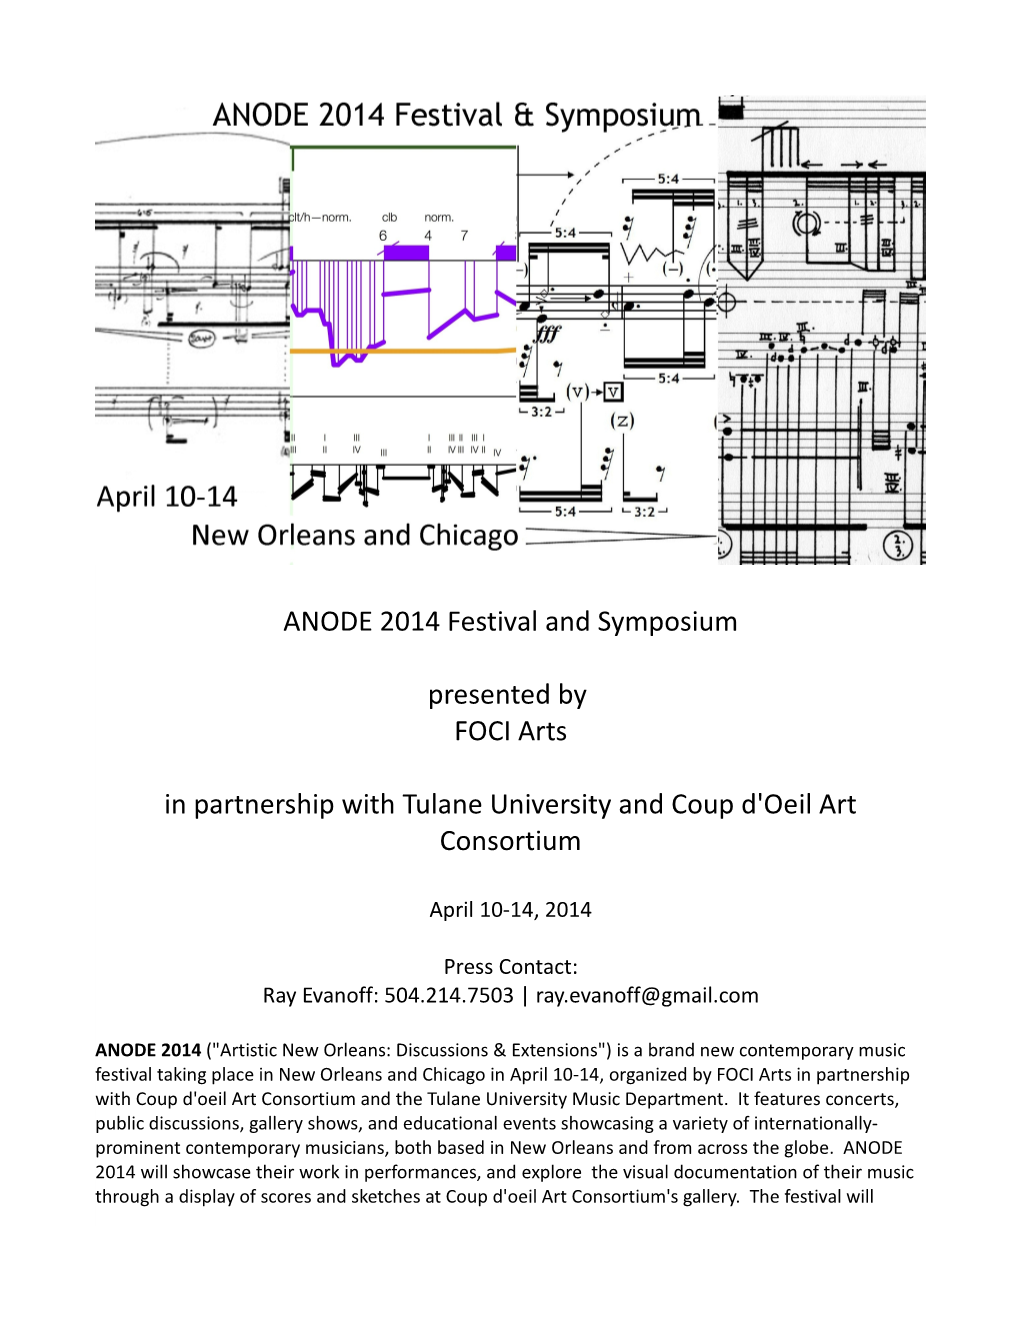 ANODE 2014 Press Release